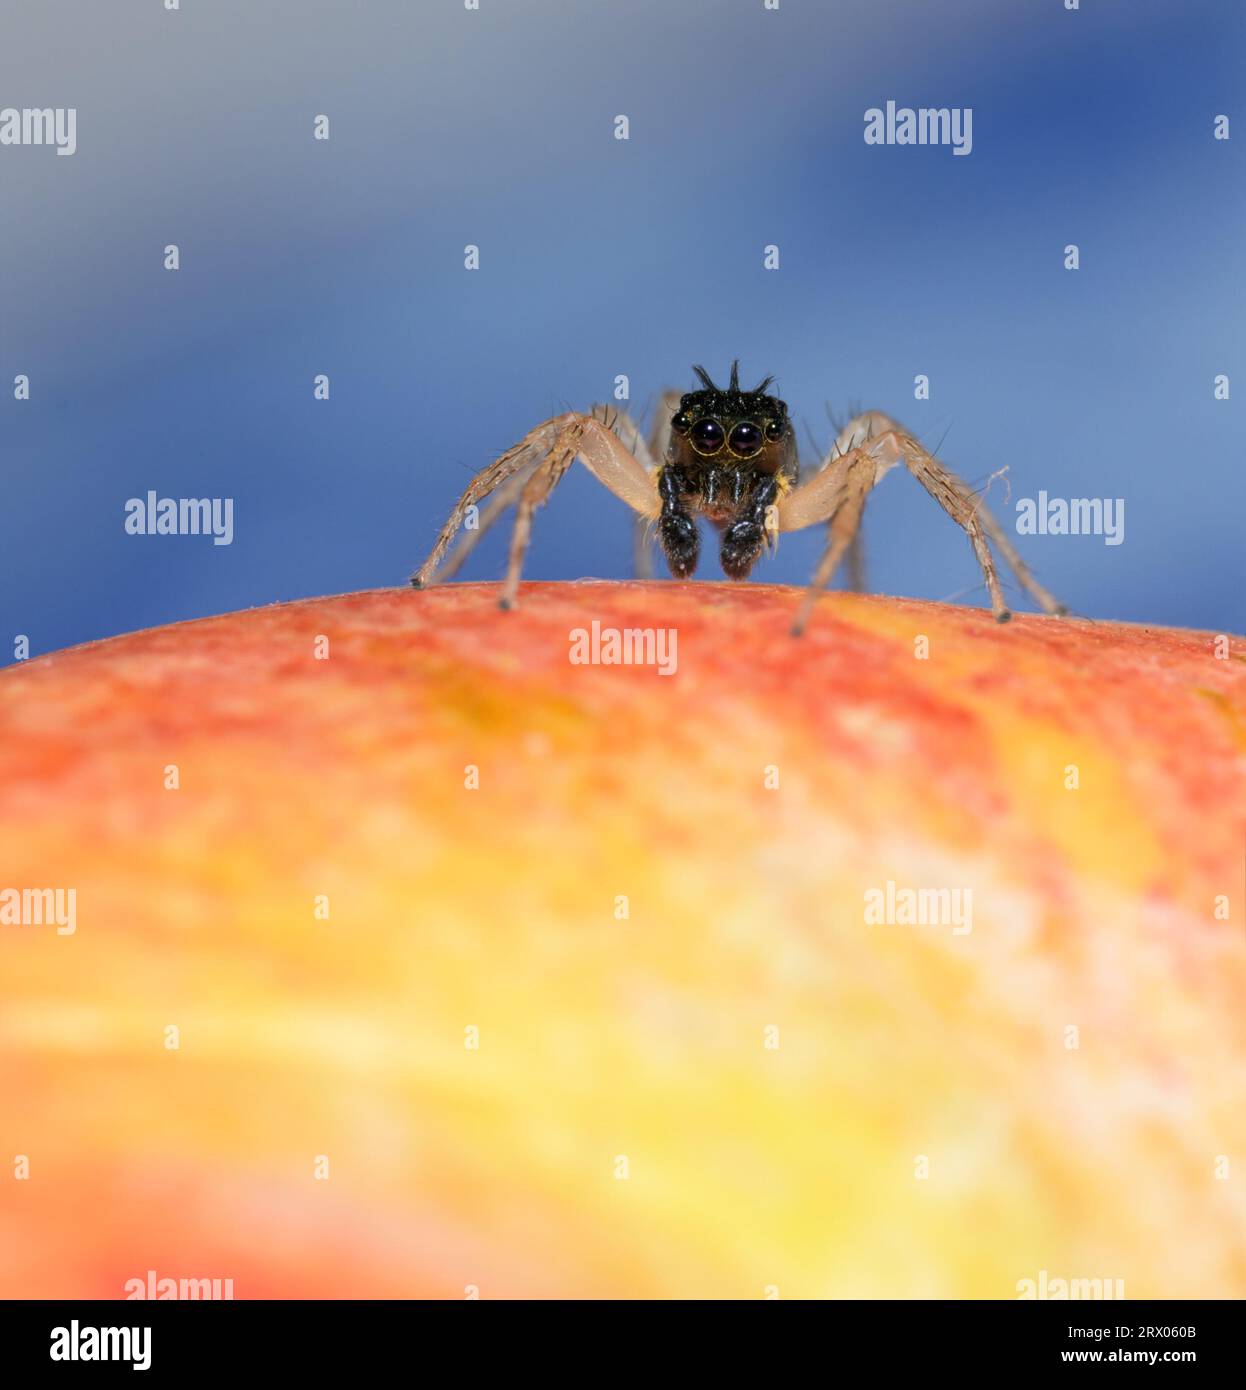 Black, tufted morph of Dimorphic jumper sitting on top of an apple, with light blue background Stock Photo